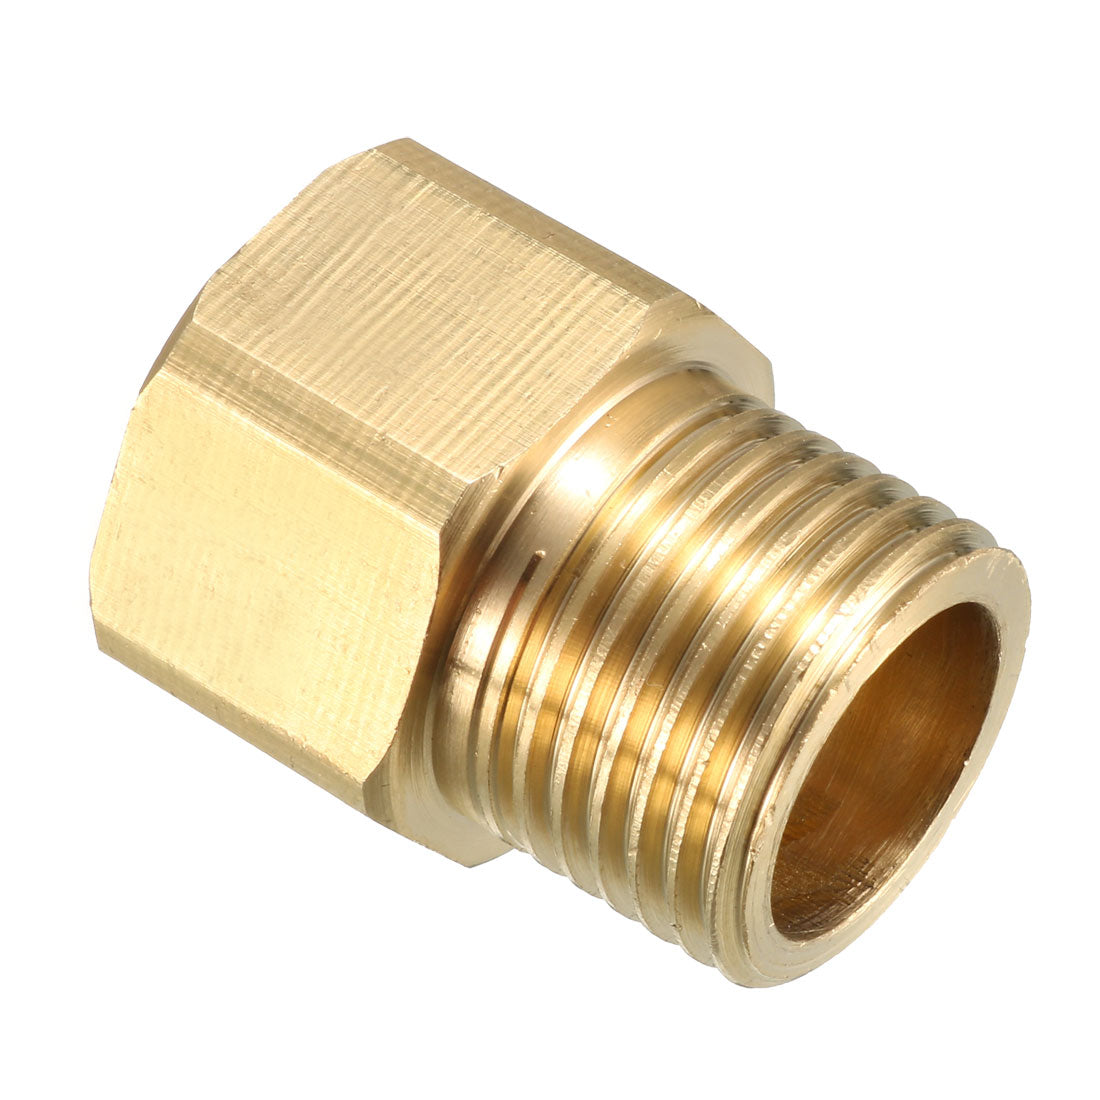 uxcell Uxcell Brass Threaded Pipe Fitting 1/2 PT Male x 1/2 PT Female Coupling 5pcs